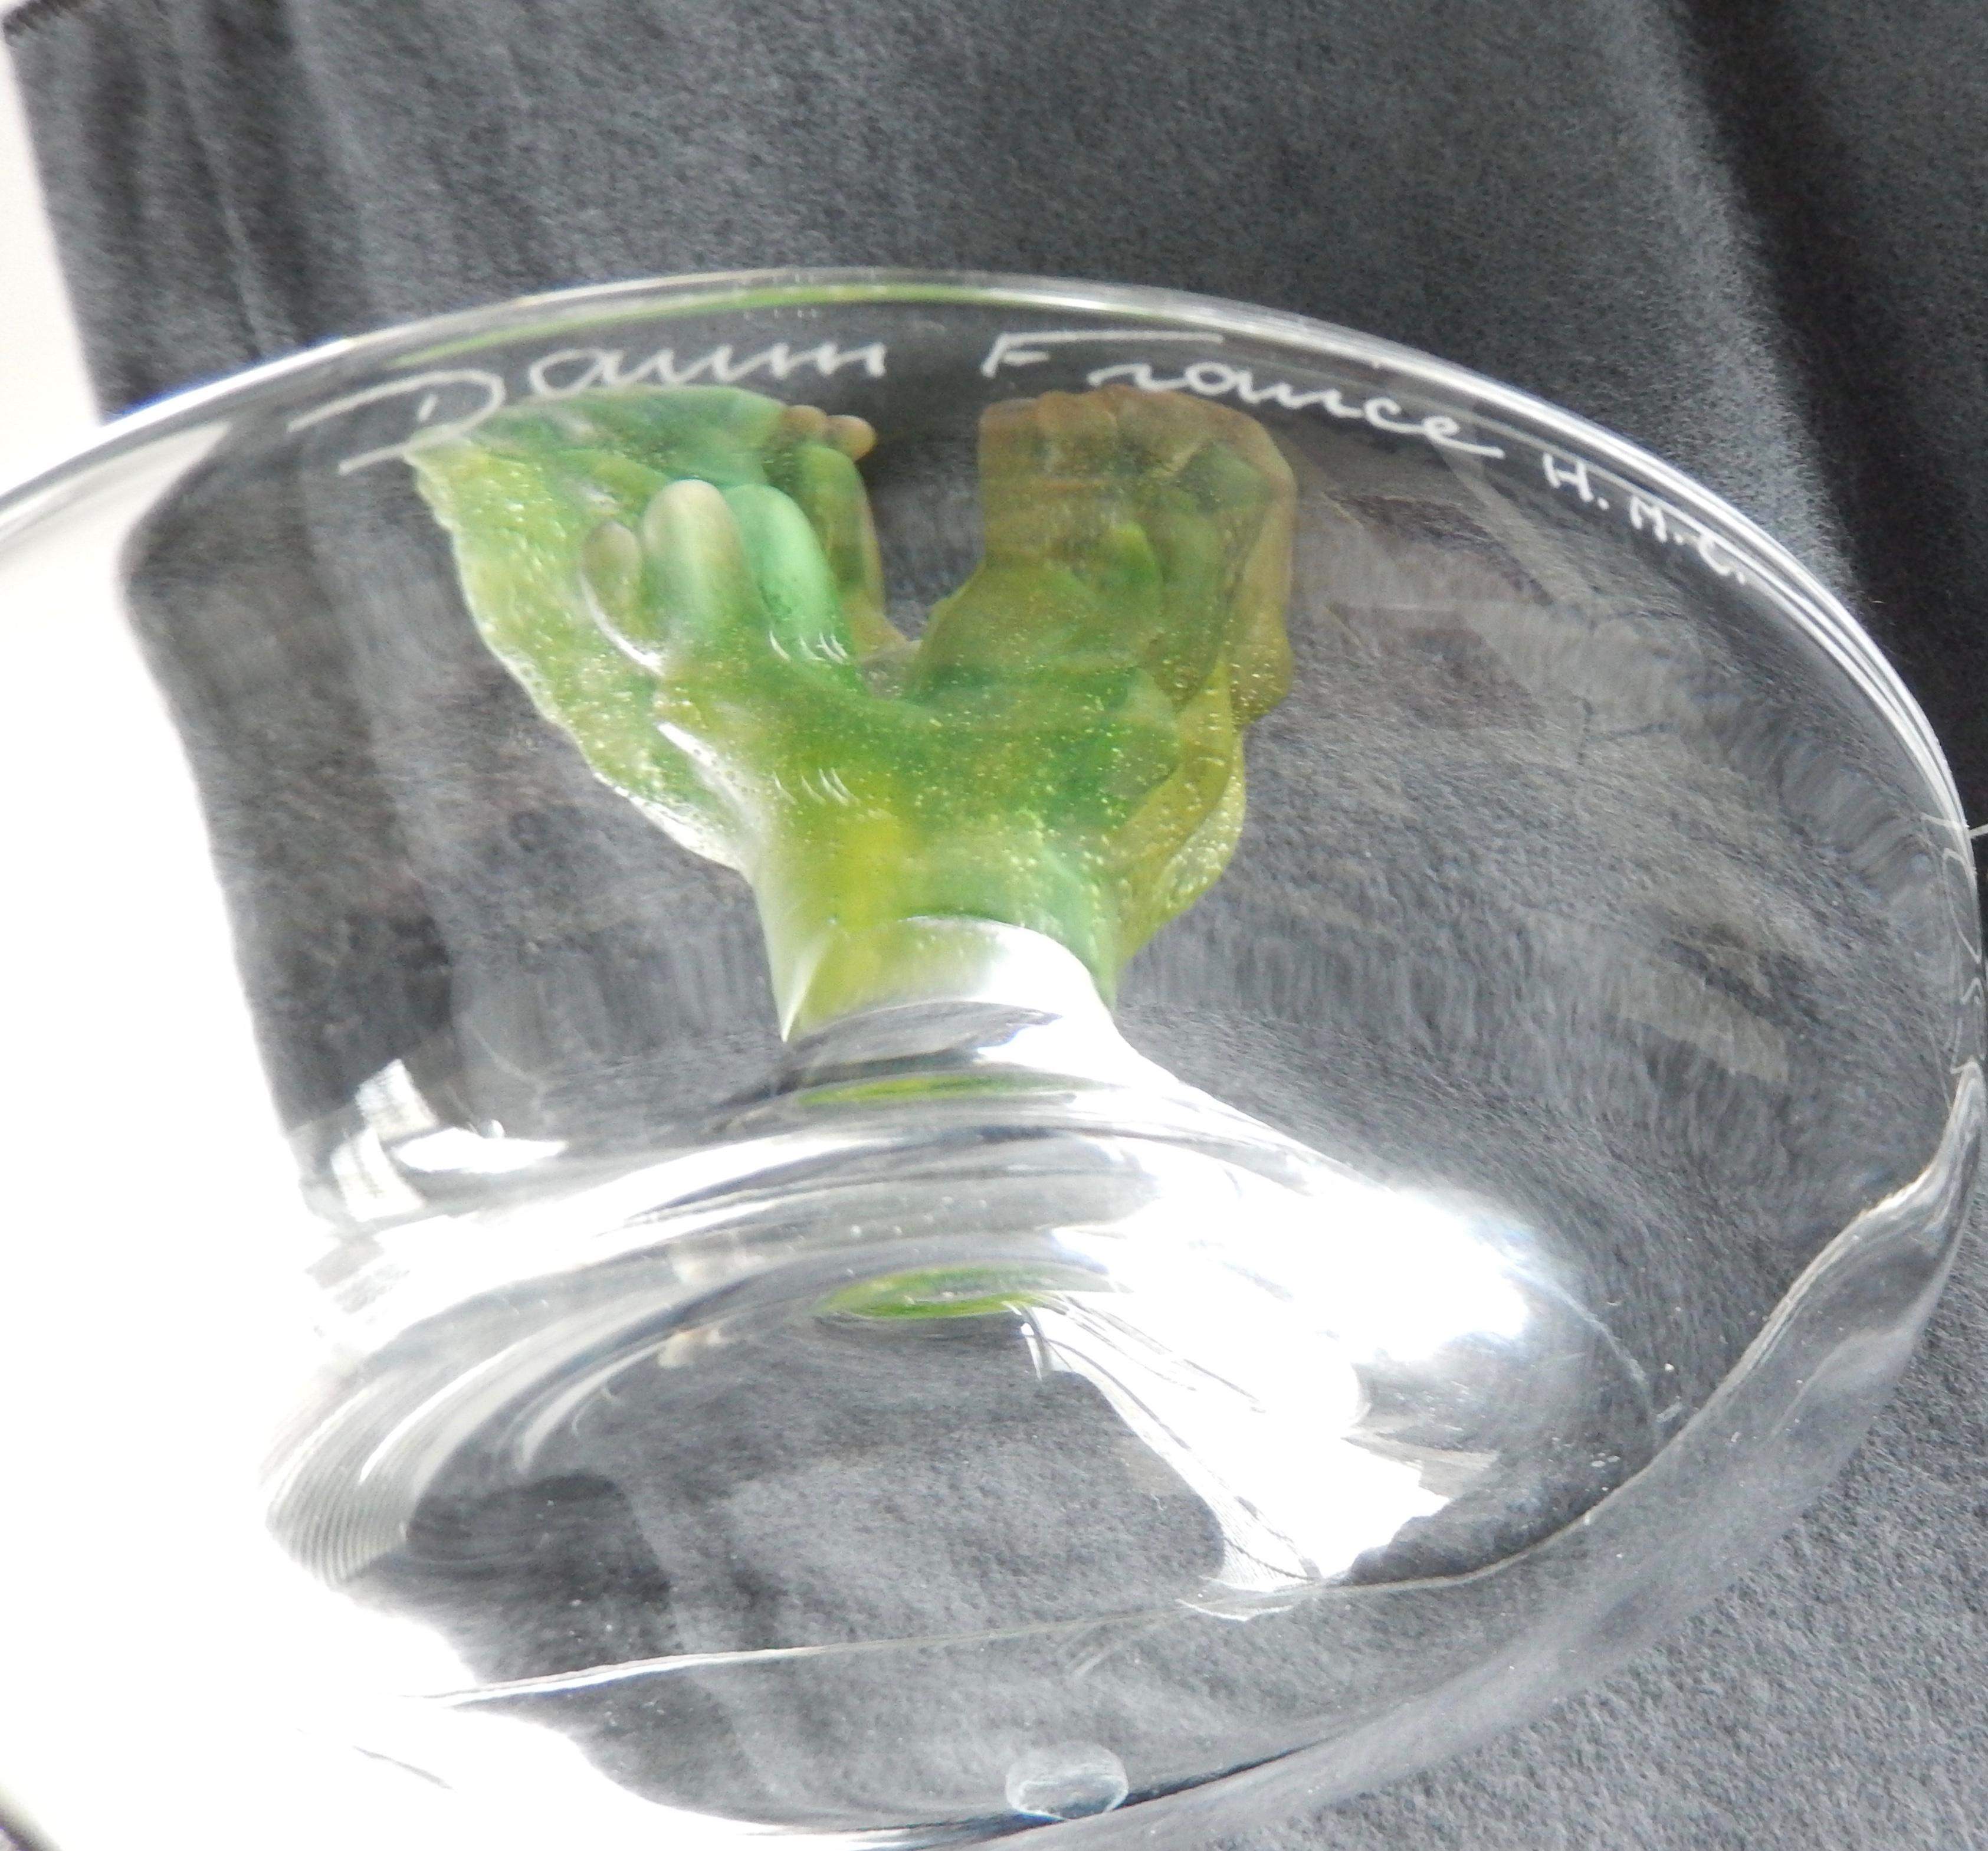 Crystal 1980s Pair of Daum Pate de Verre Cactus Dishes by Hilton McConnico For Sale